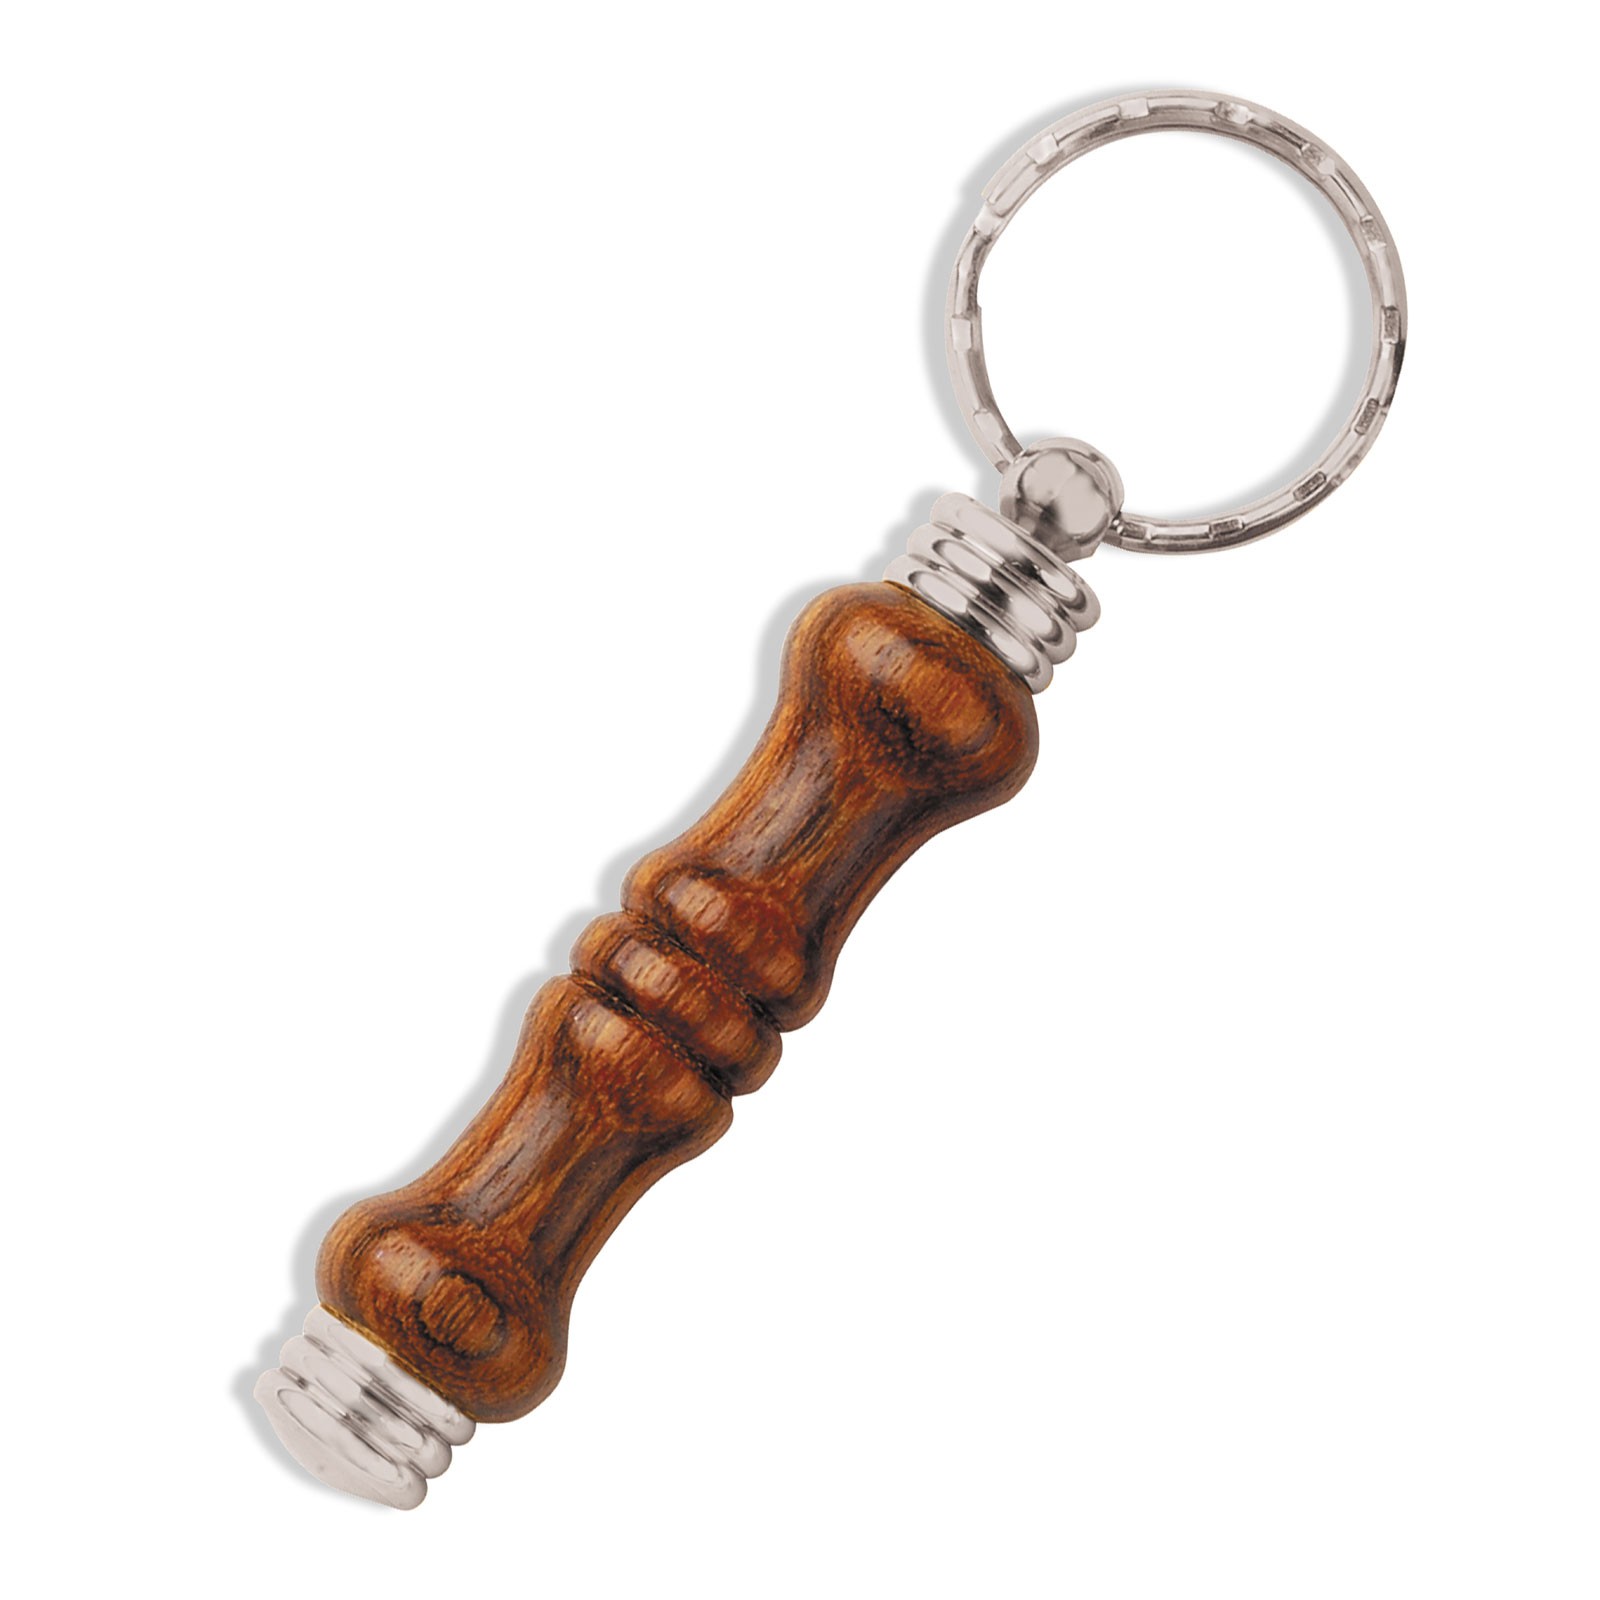 Secret Compartment Brushed Satin Key Chain Kit | Penn State Industries